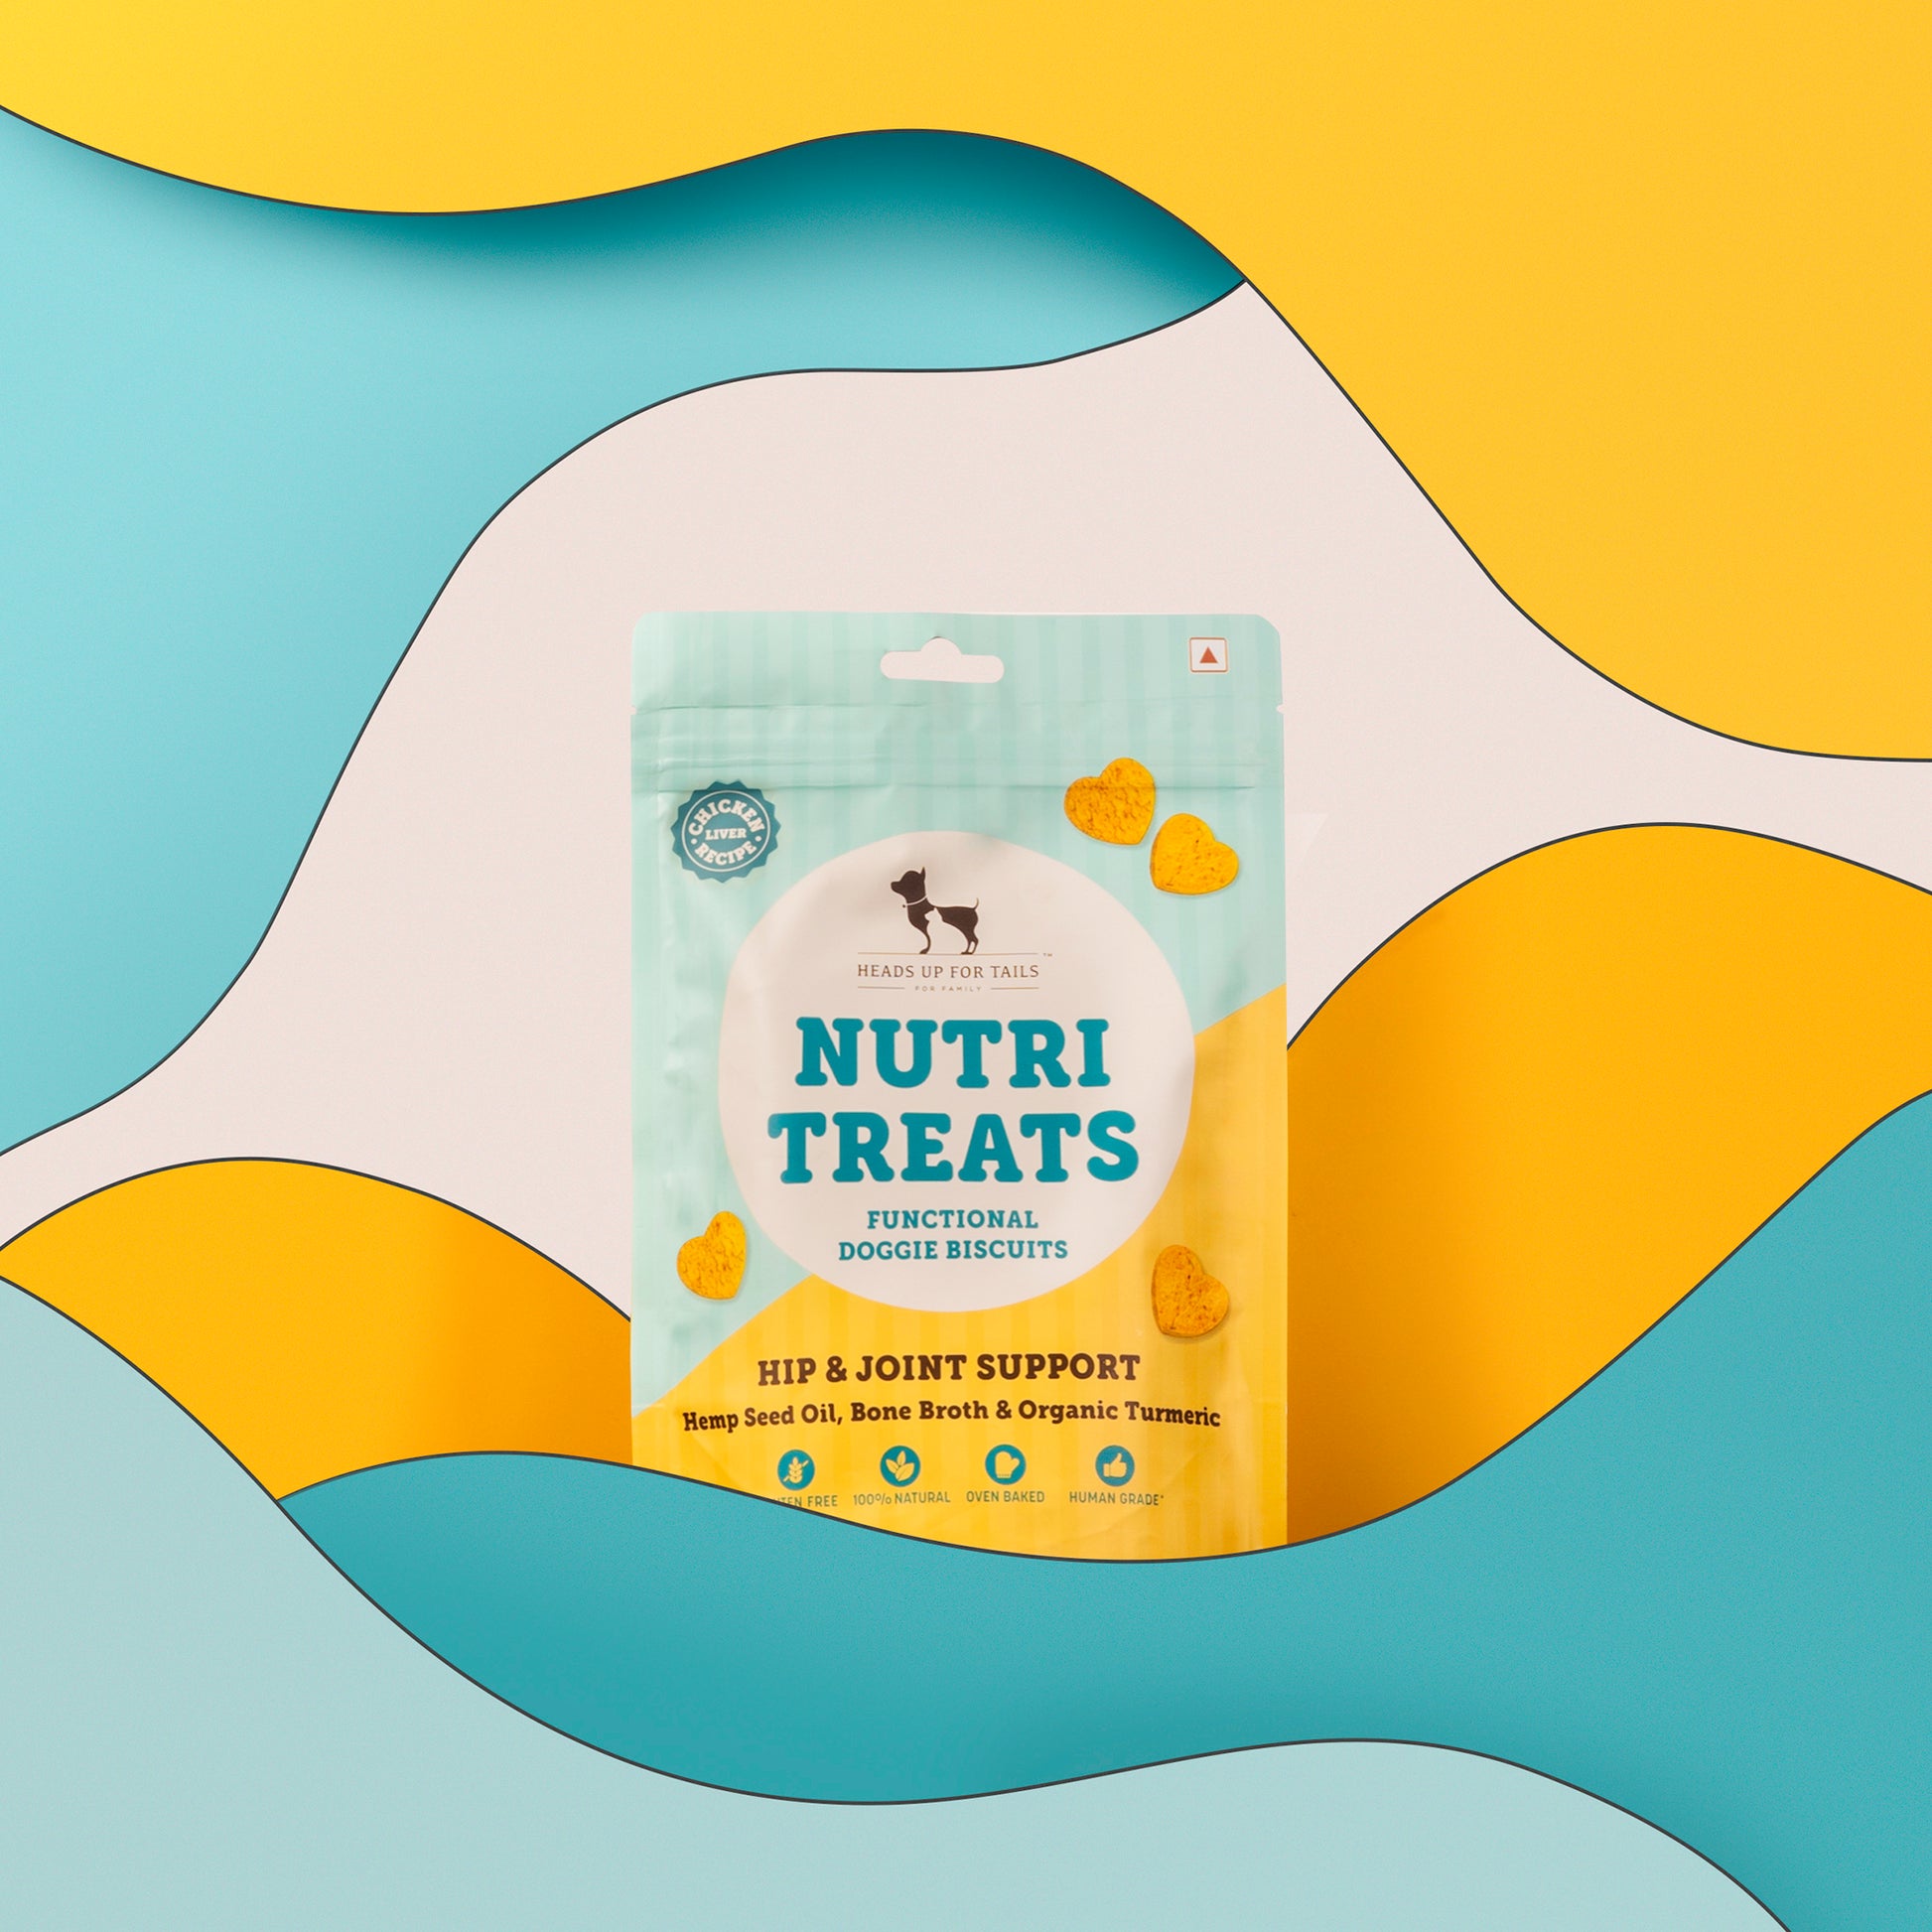 HUFT Nutri Treats For Dogs - Hip & Joint Support - 150 g - Heads Up For Tails